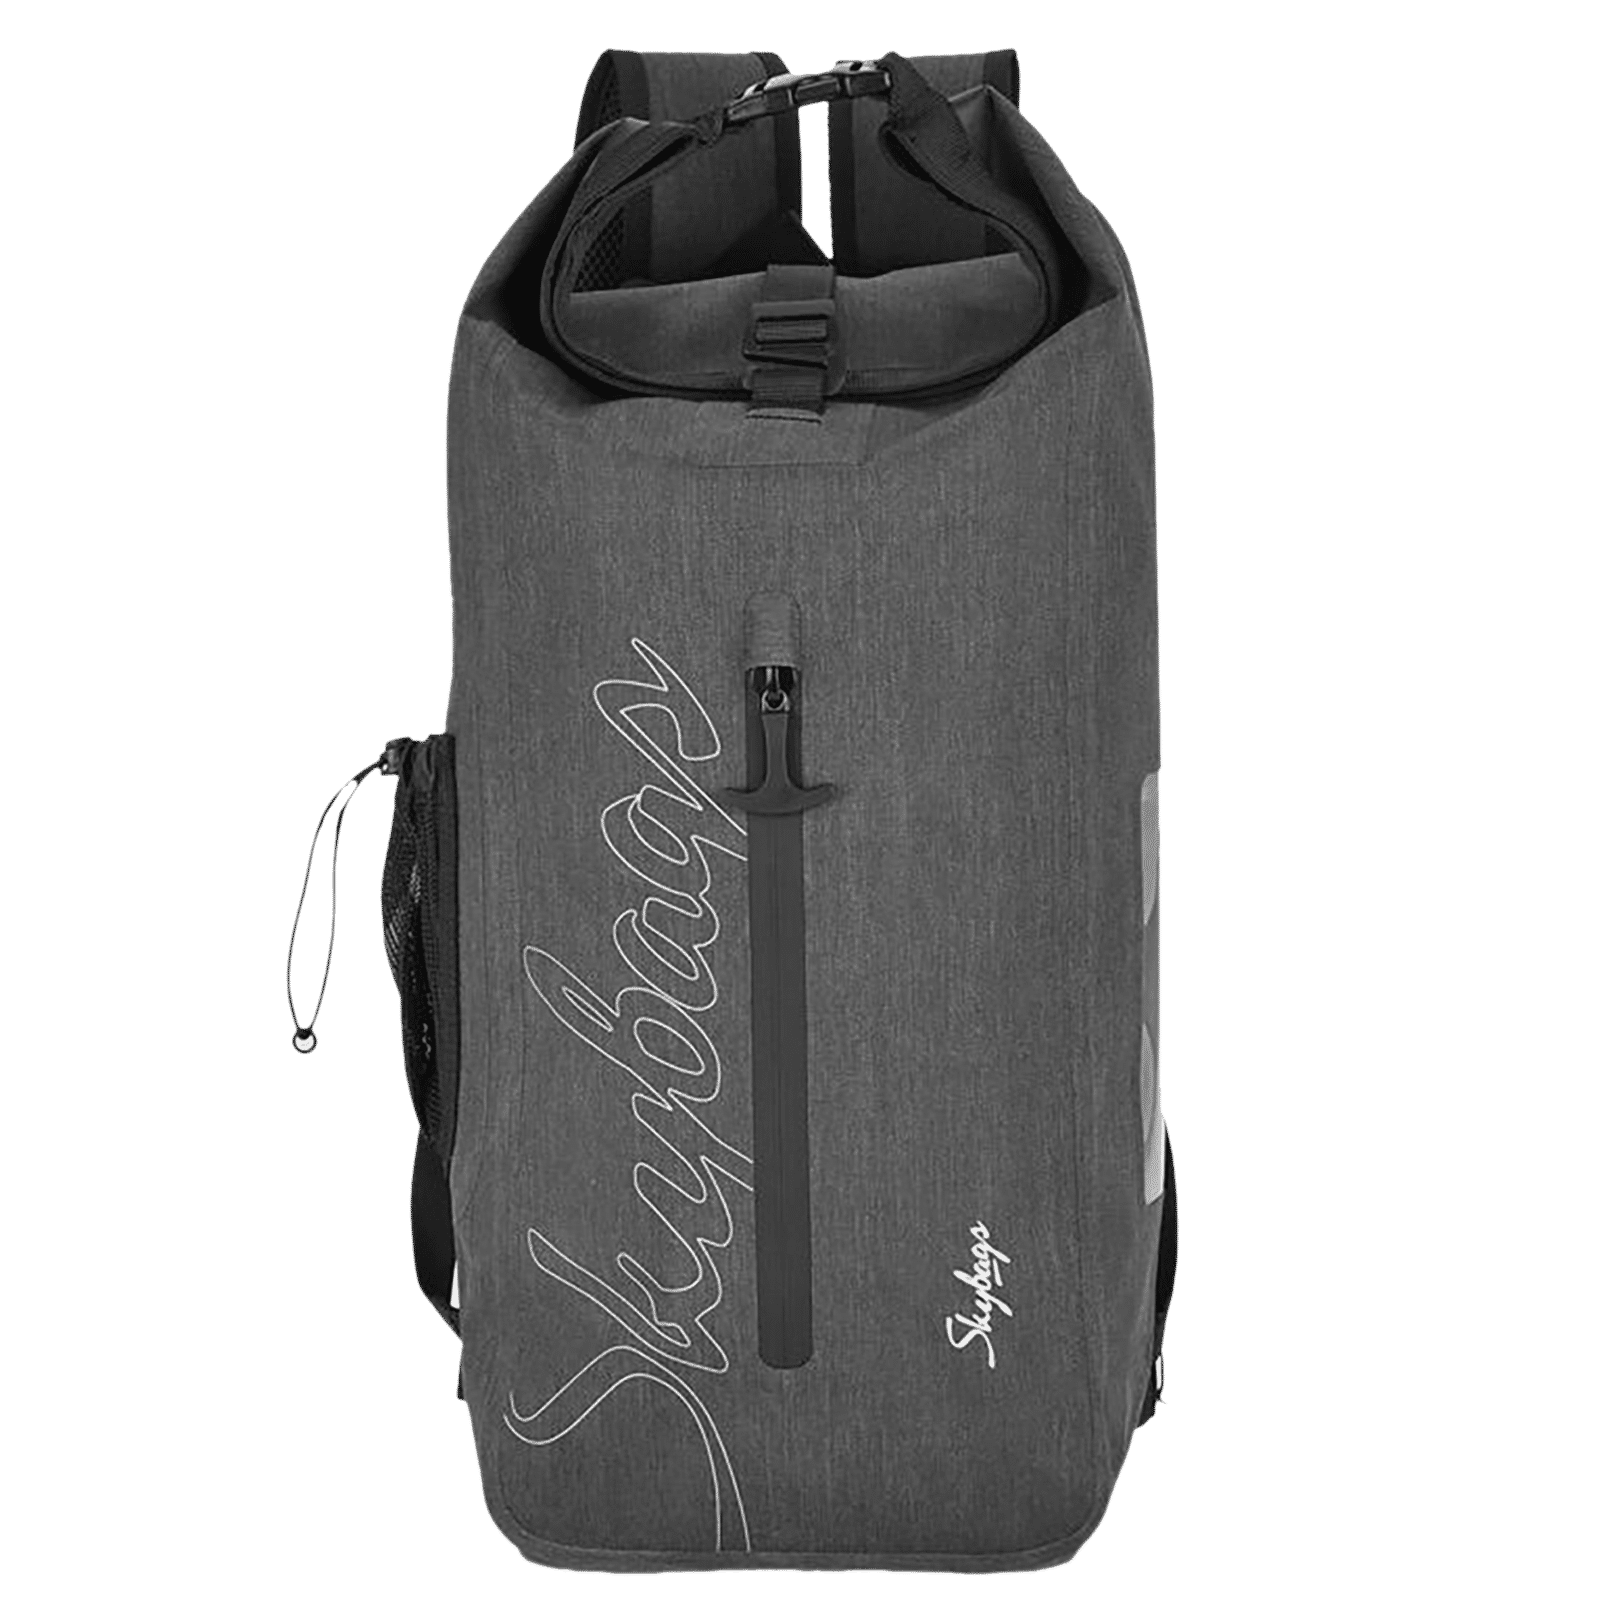 Buy Skybags BOHO WITH RAIN COVER BLACK CASUAL BACKPACK 23L at Amazon.in